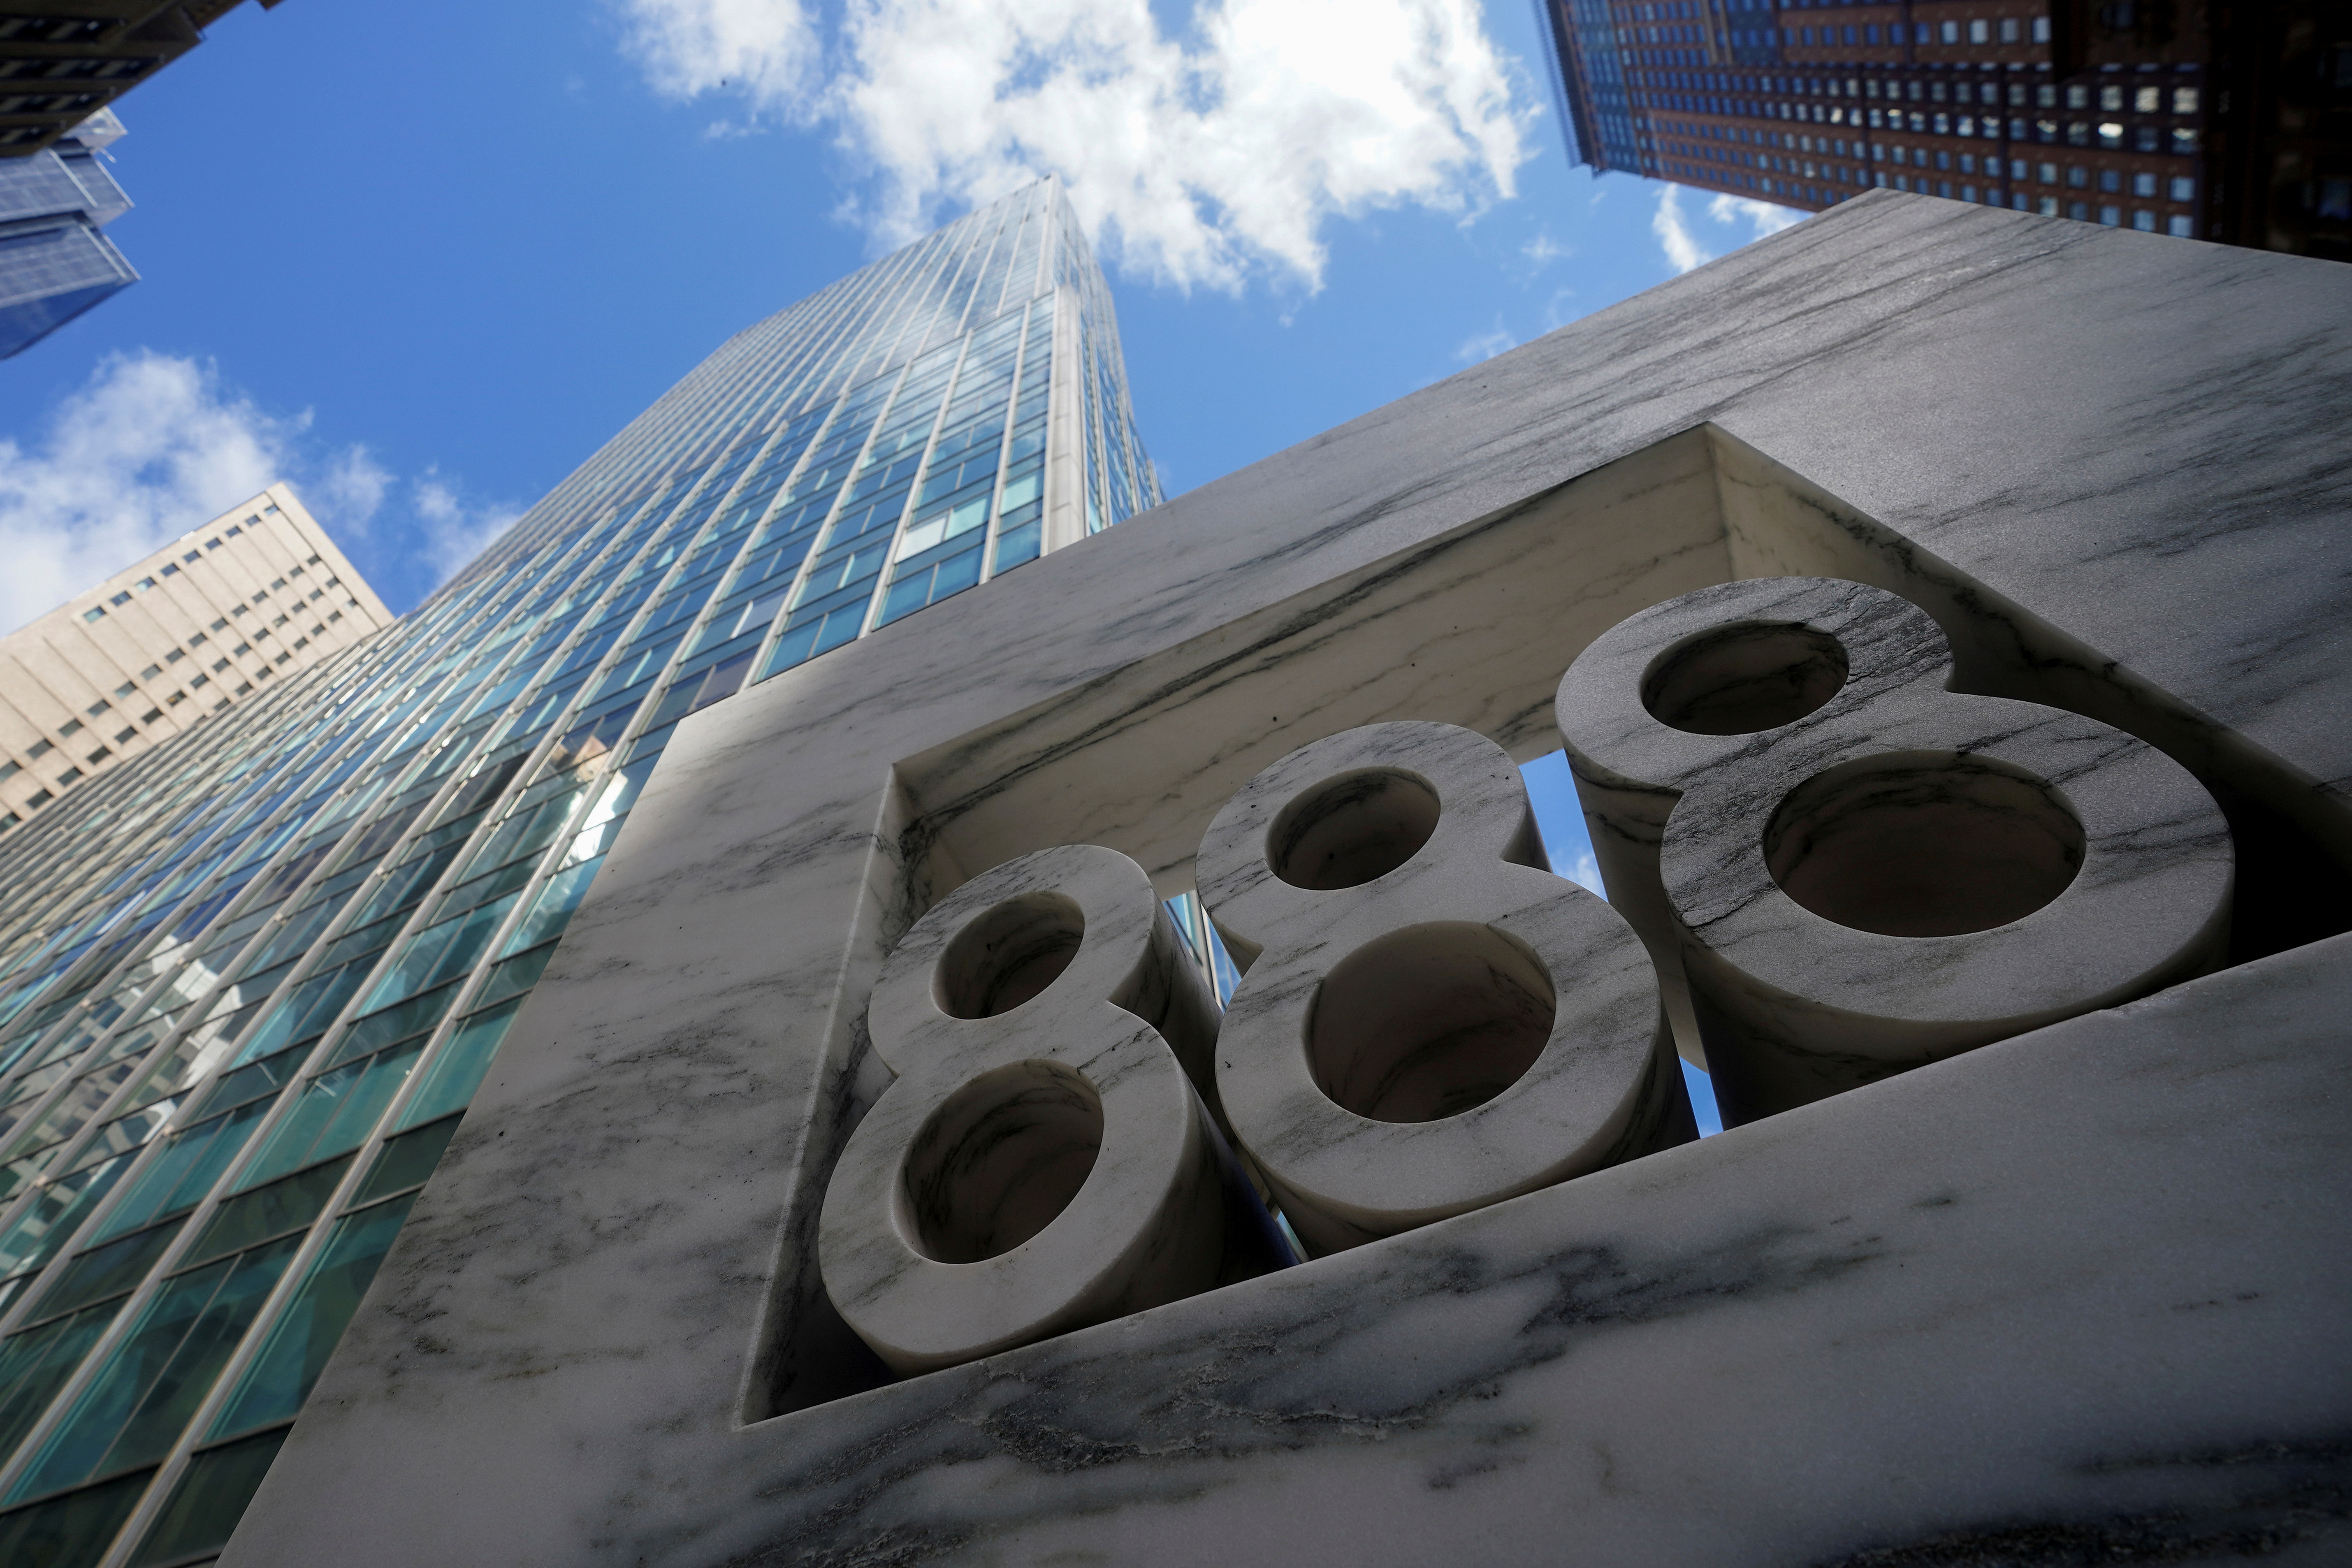 888 7th Ave, a building that reportedly houses Archegos Capital is pictured in New York City